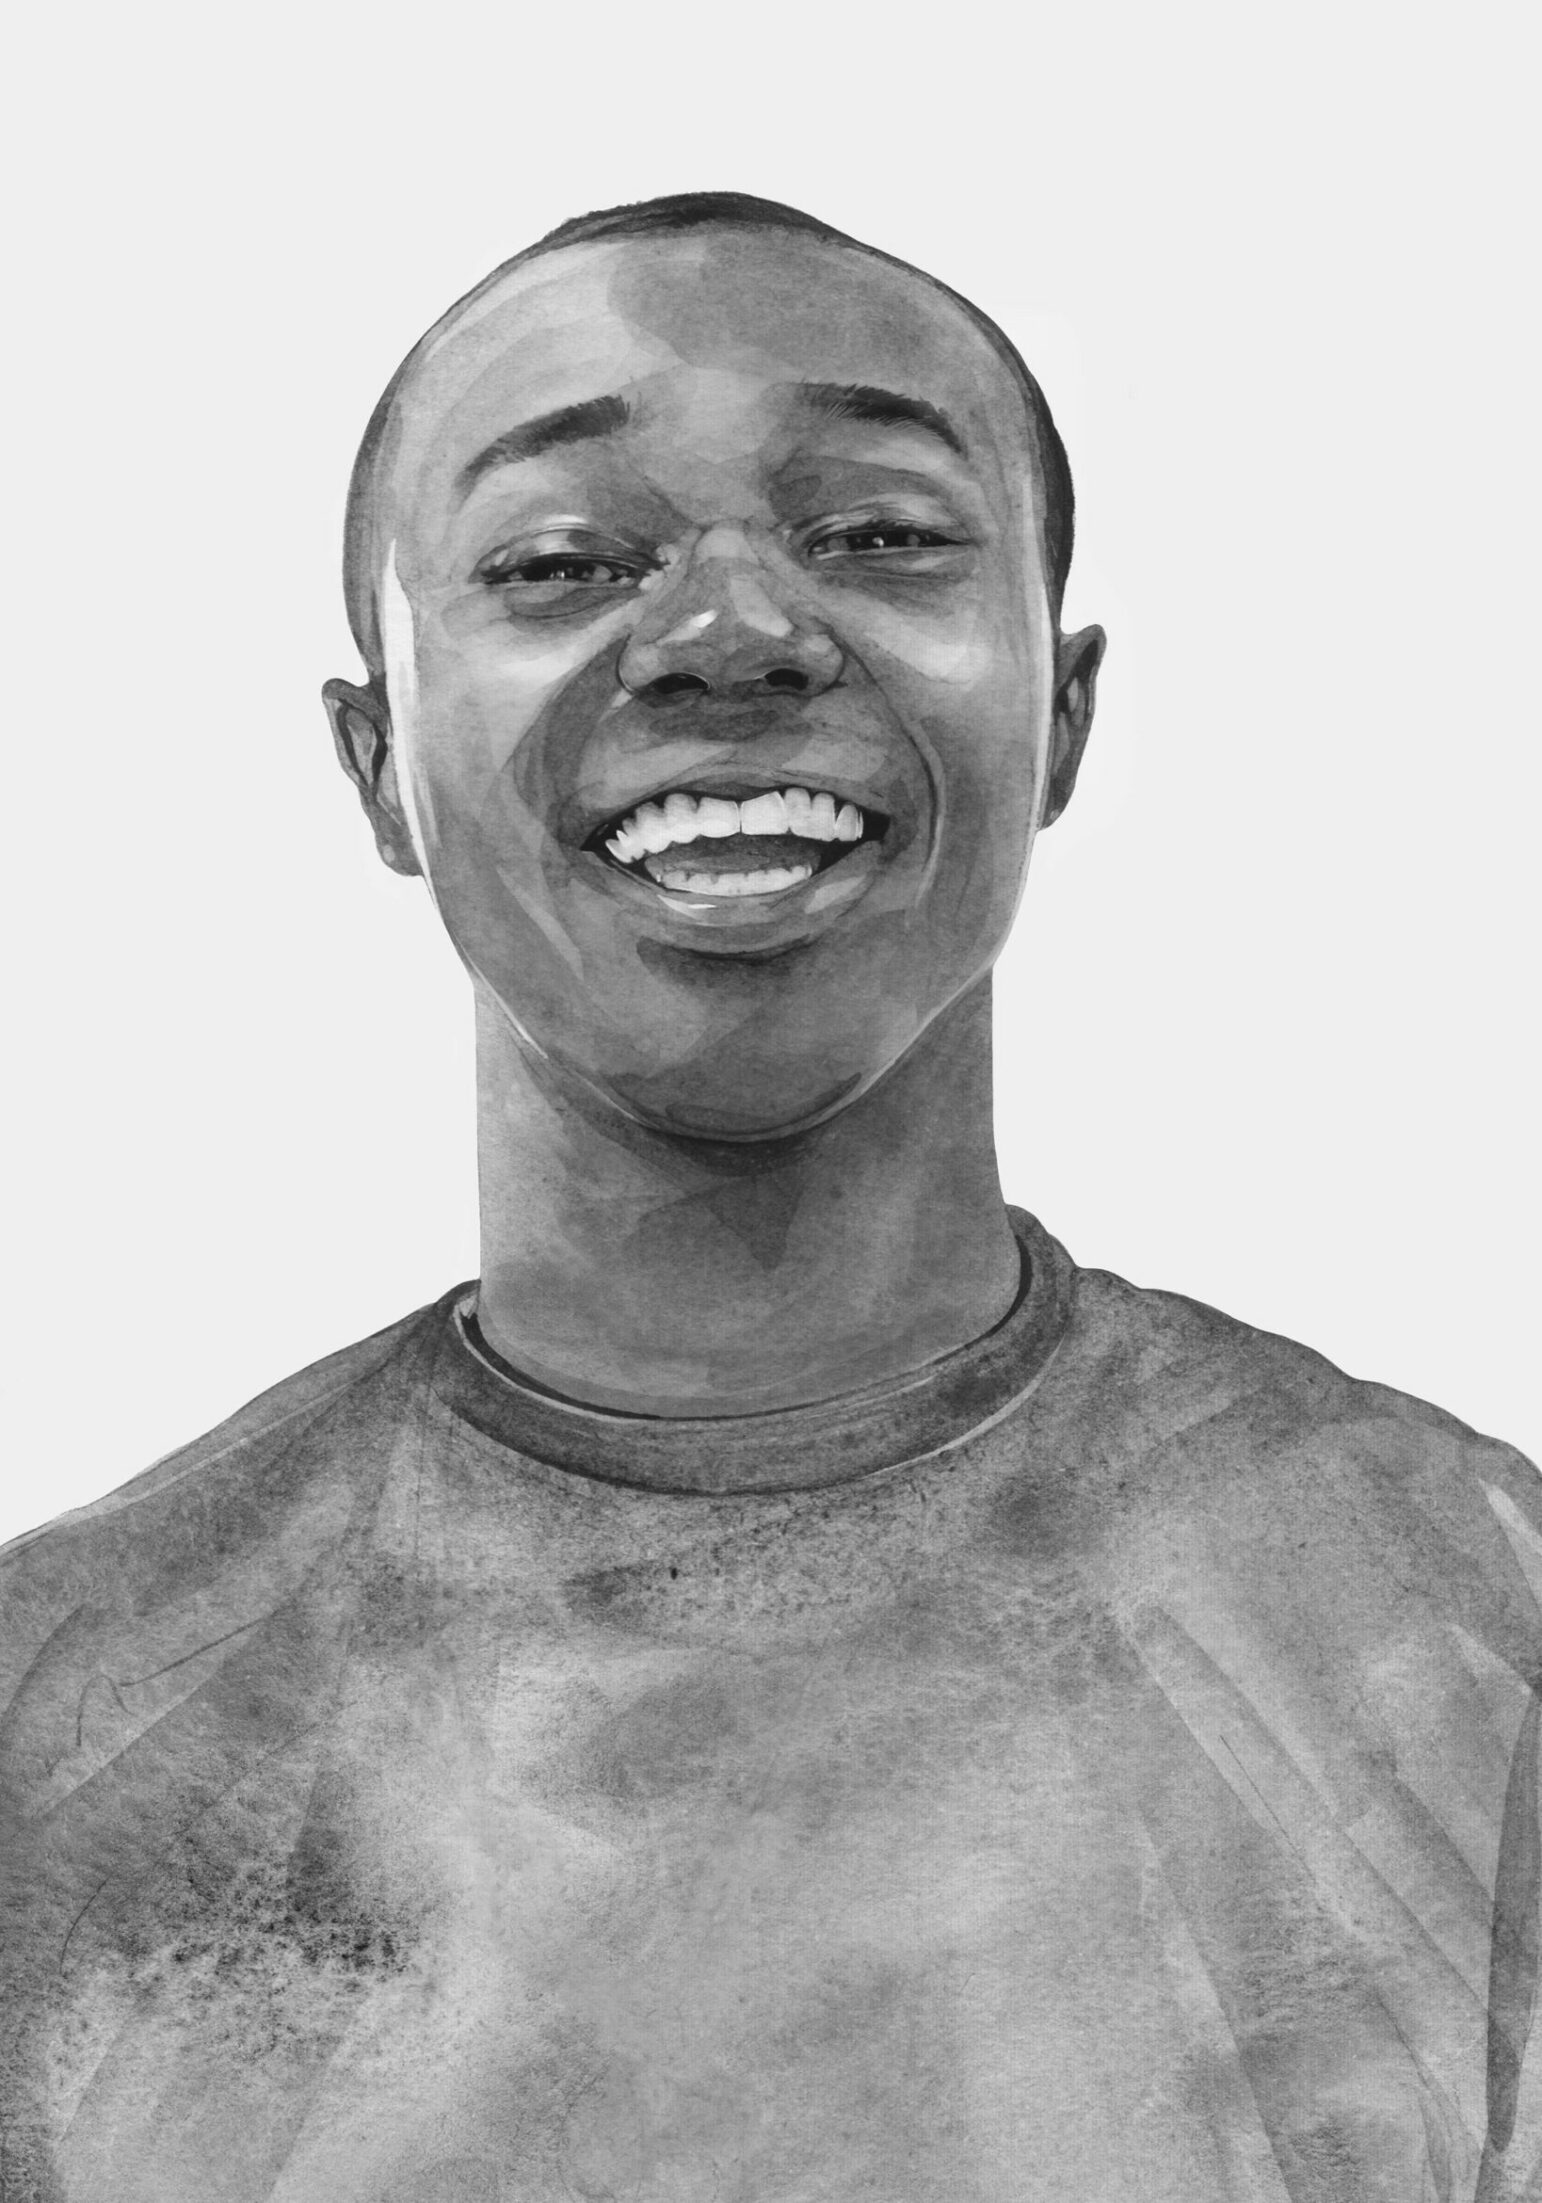 An illustrated, grayscale portrait of a 20-year old Black man smiling broadly. He has short-cropped hair and his eyes are wrinkled at the edges as he appears to be laughing.